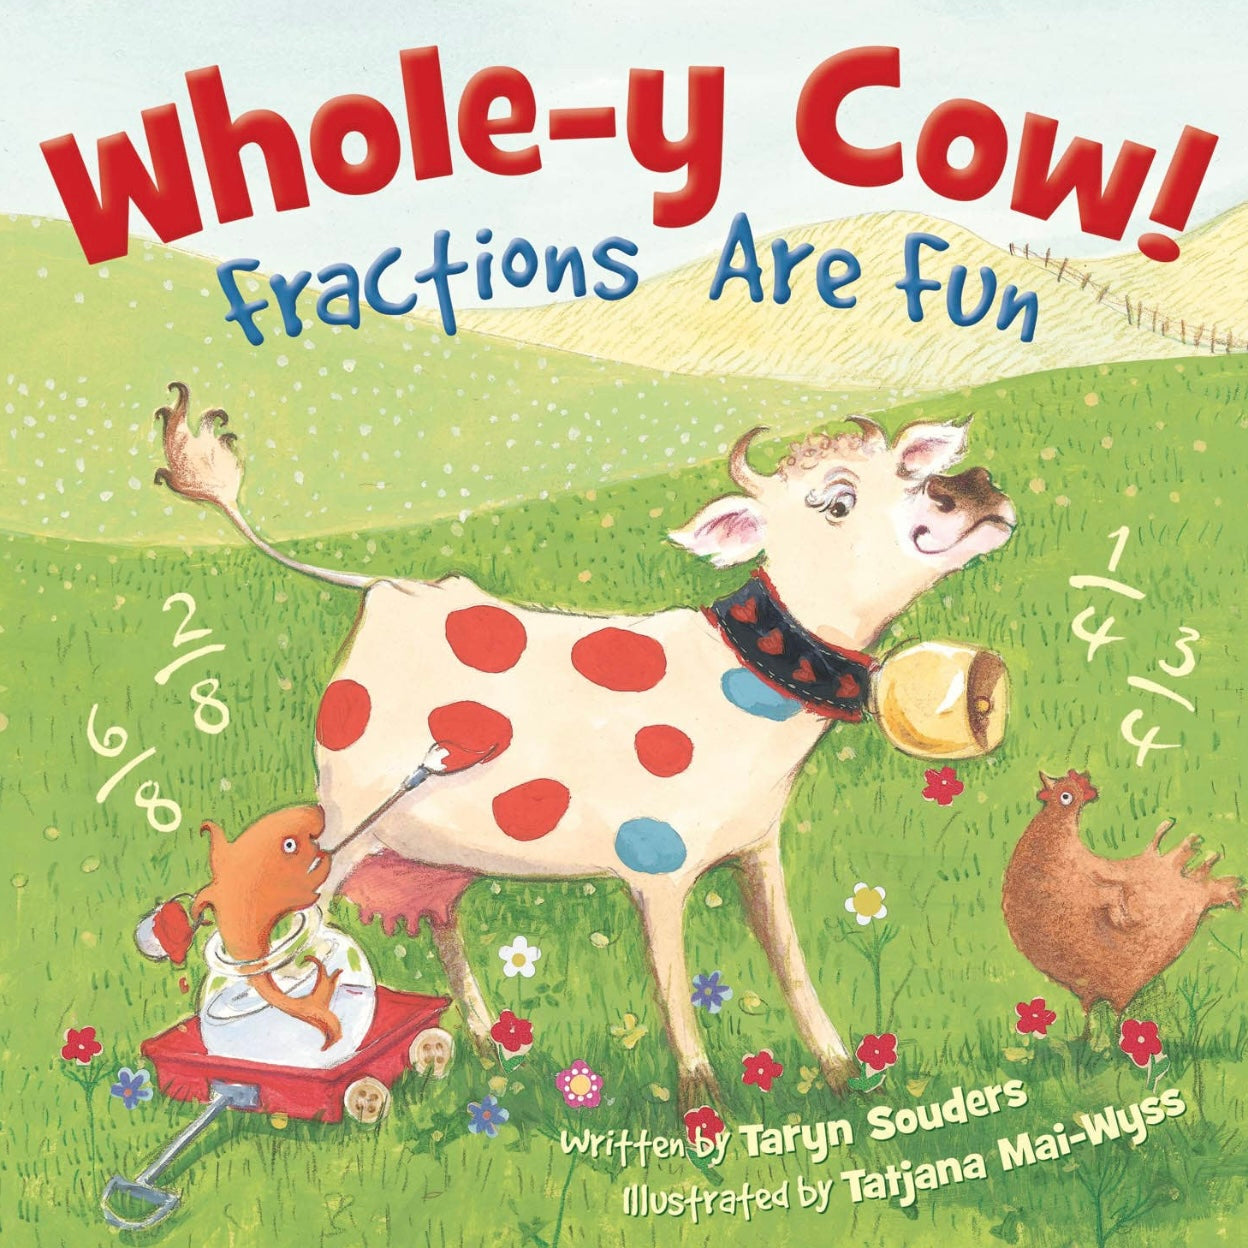 Whole-y Cow! Fractions Are Fun